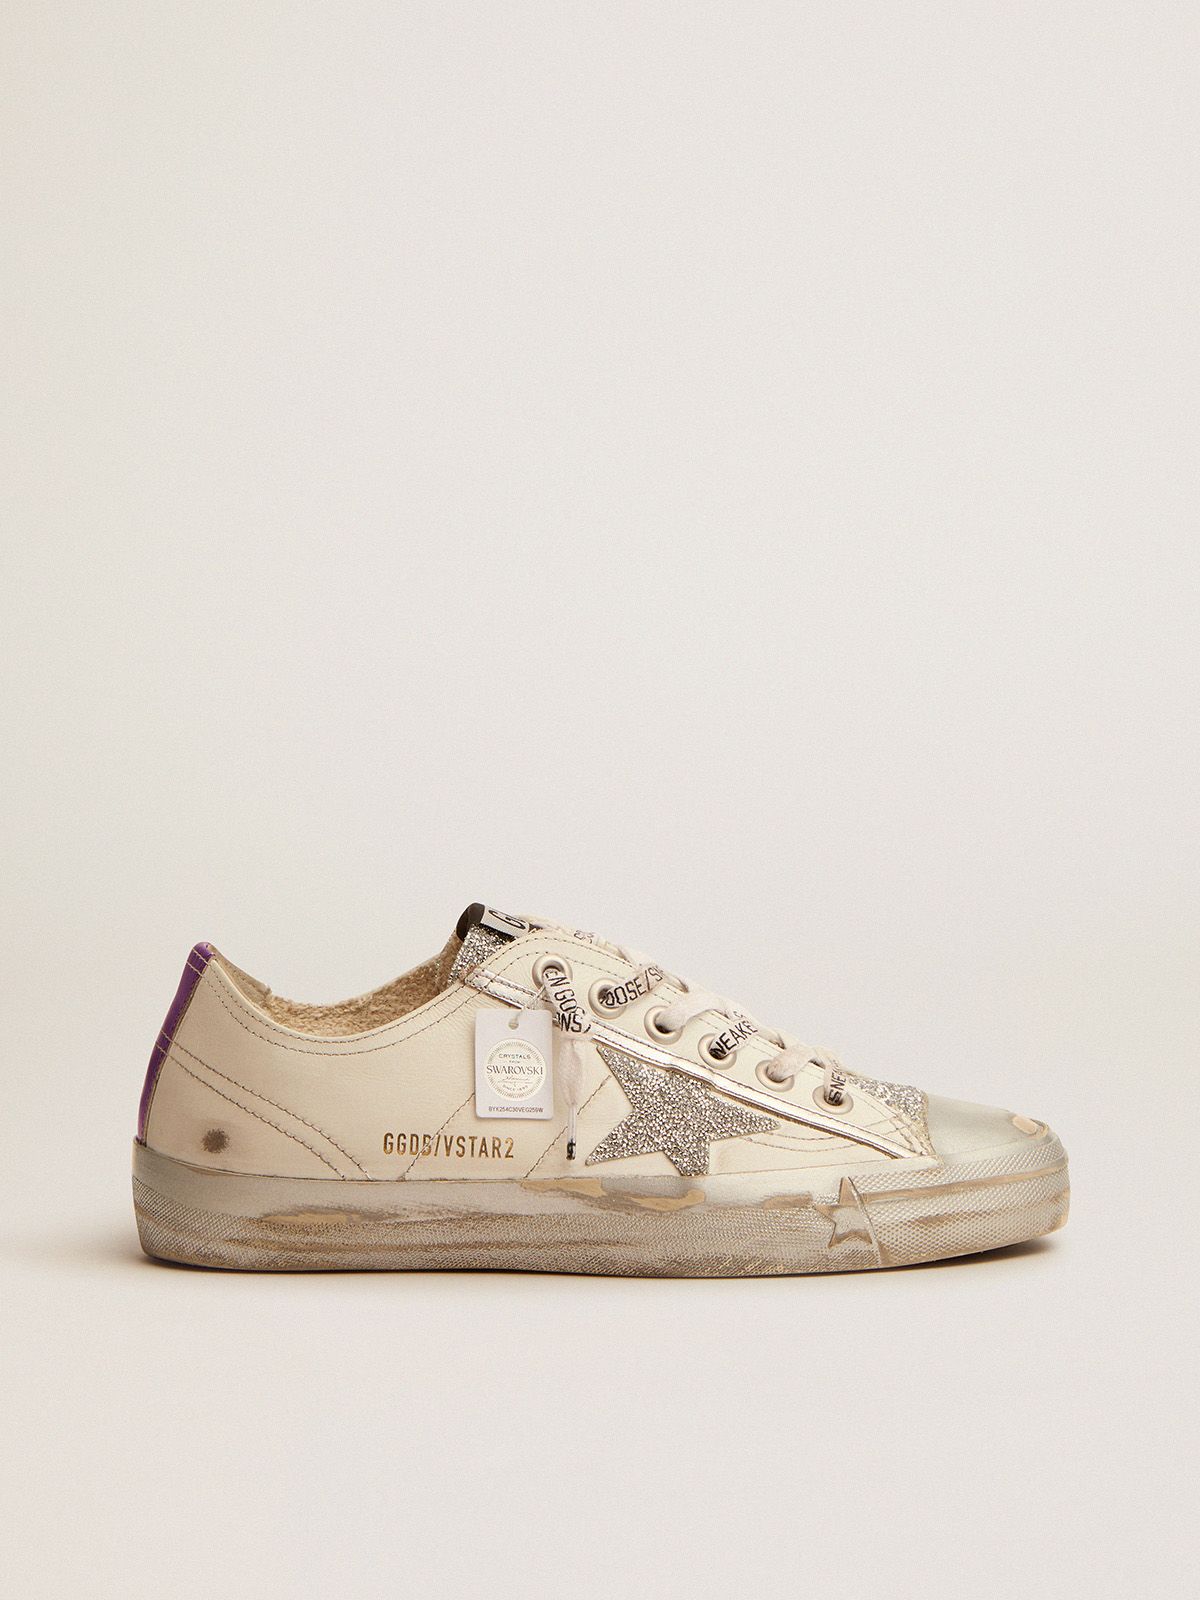 golden goose crystals sneakers LTD white and V-Star in leather